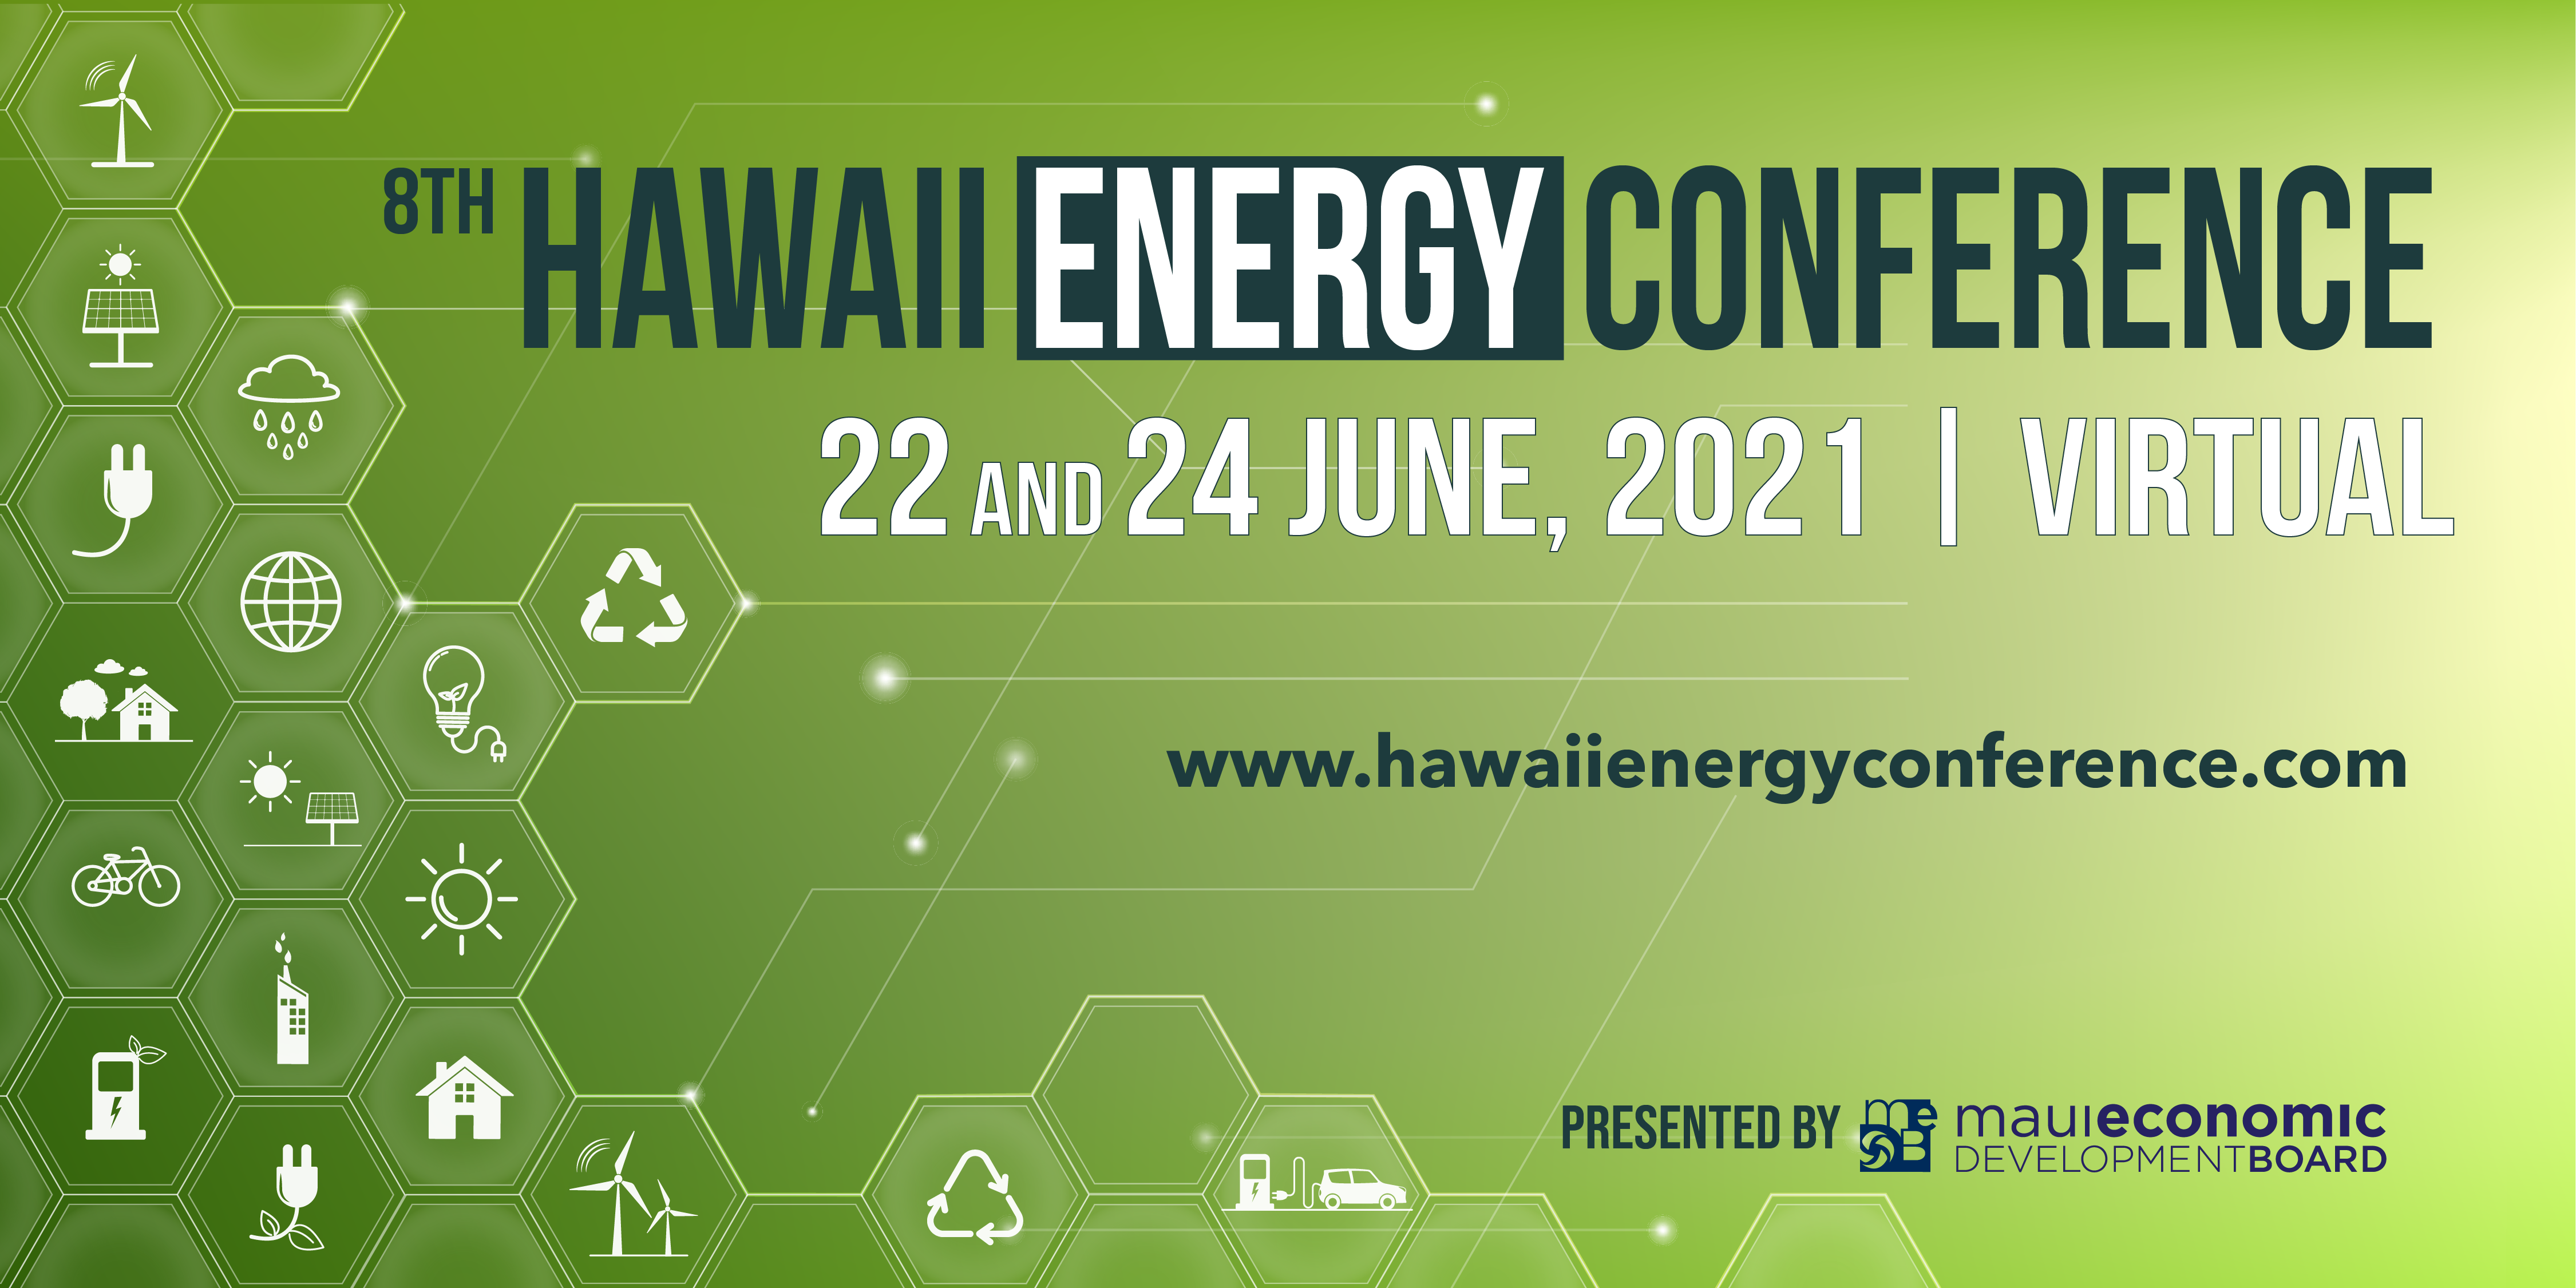 Conference to explore the Energy Transition in Hawaii